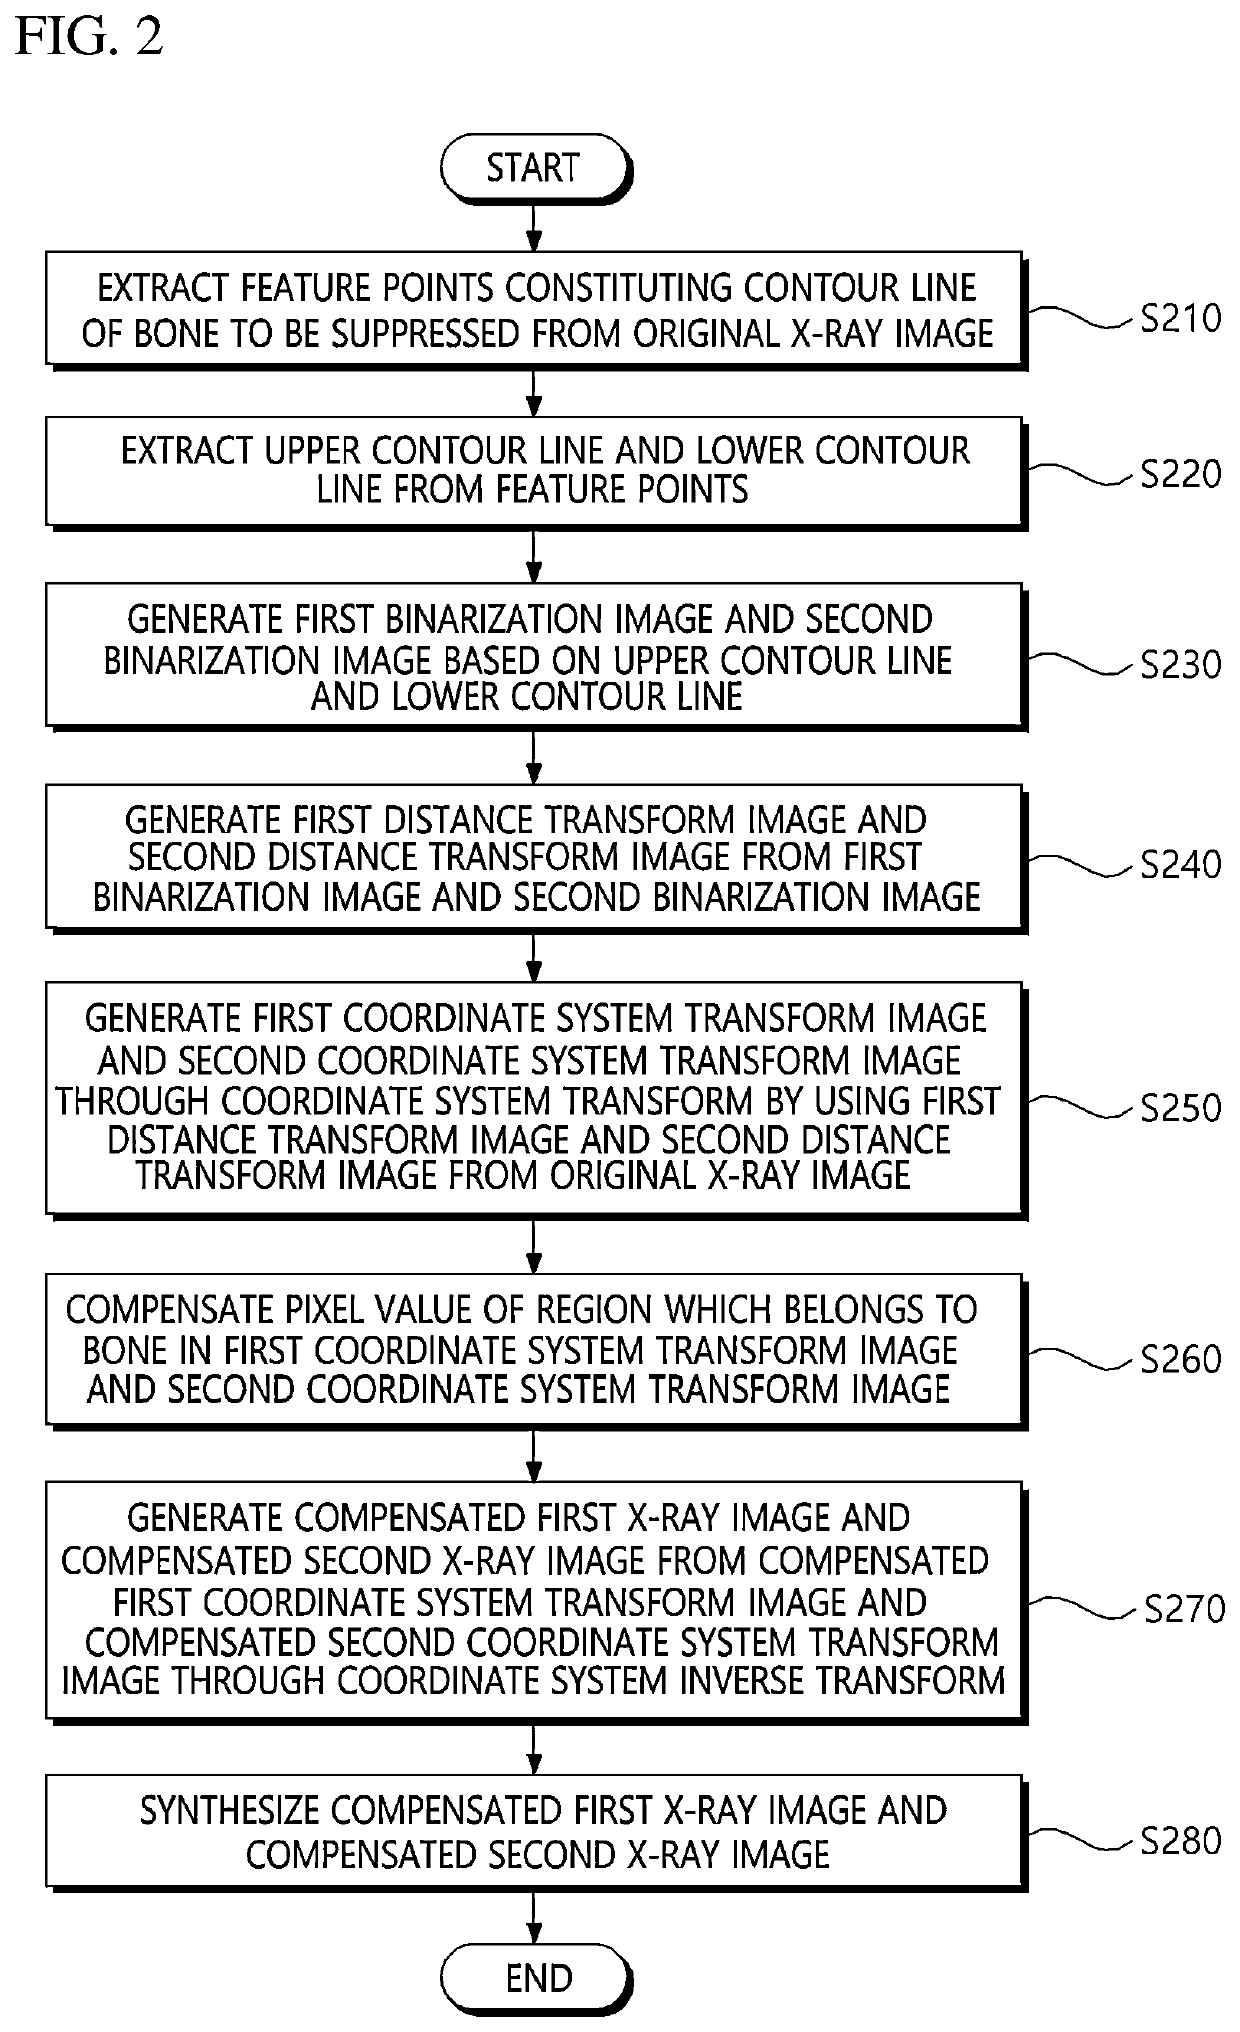 Method and apparatus for bone suppression in x-ray image